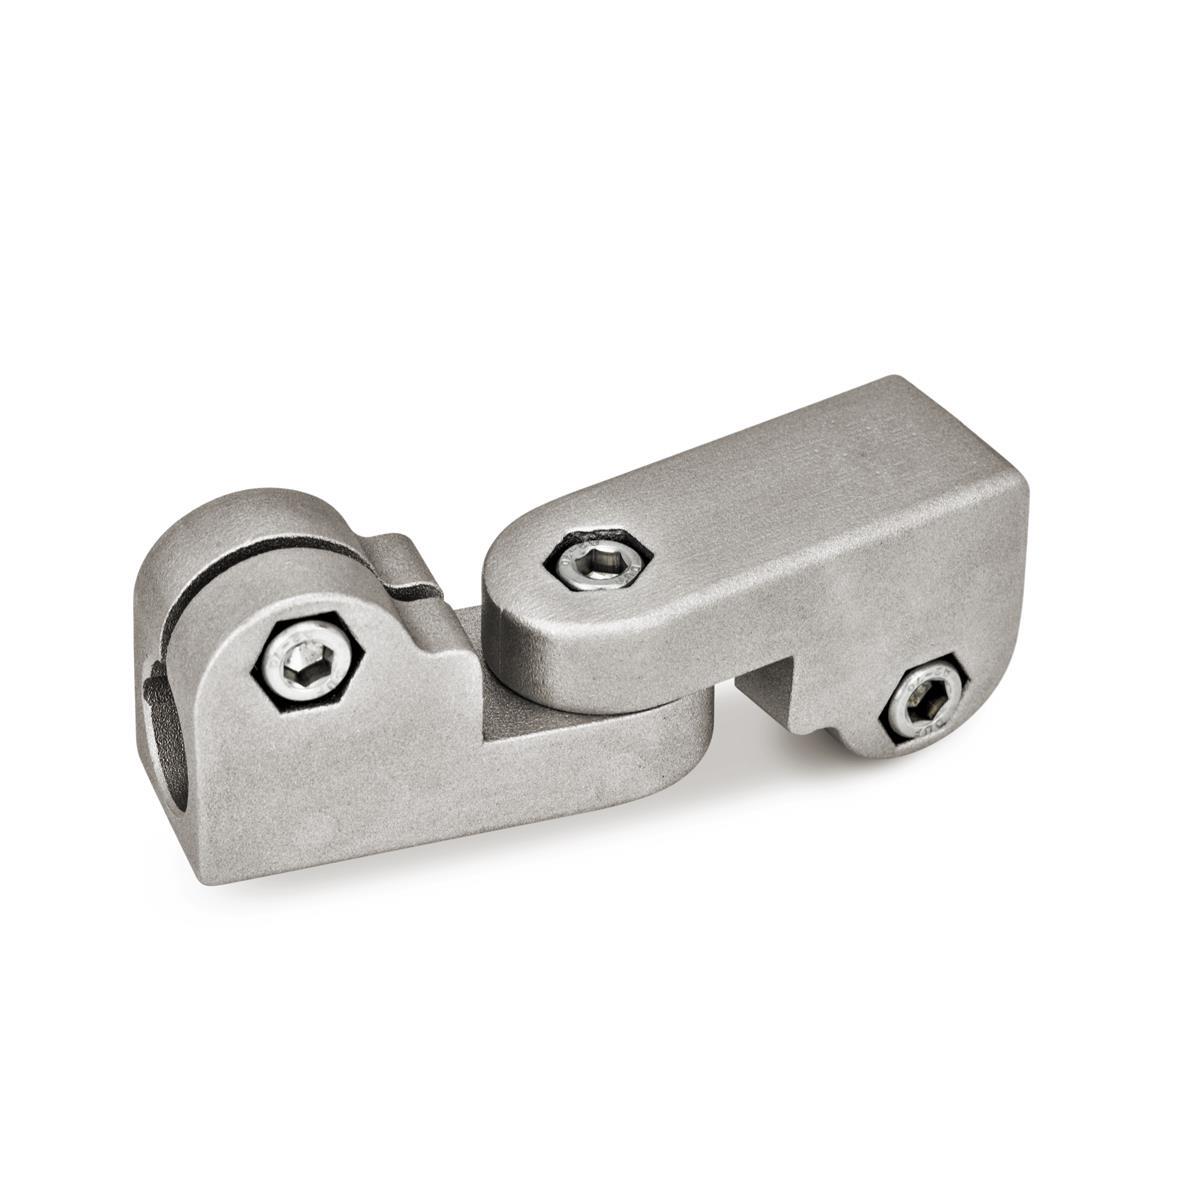 GN 285 Stainless Steel Swivel Clamp Connector Joints 